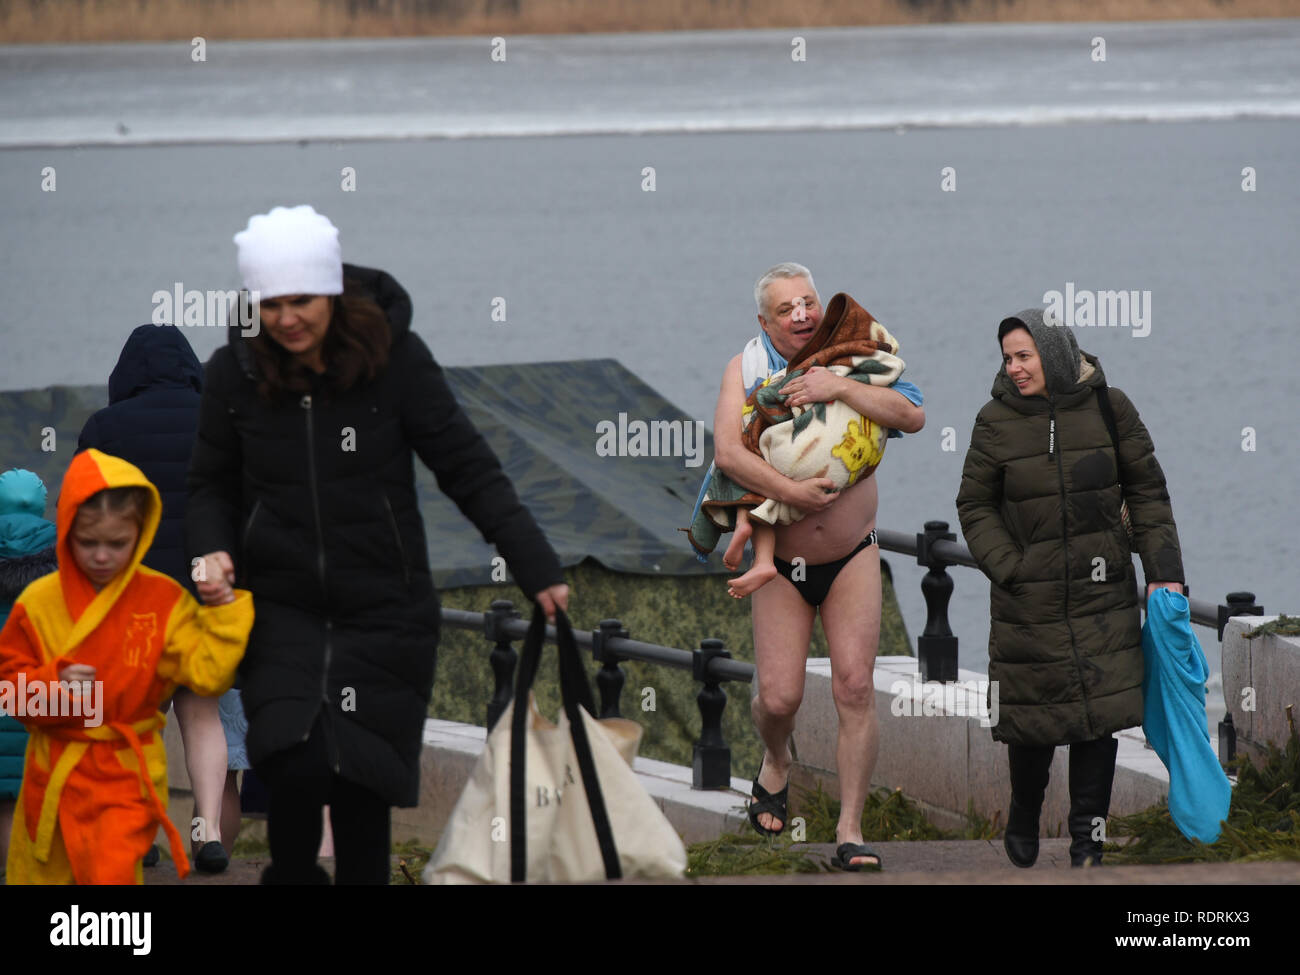 Astrakhan, Russia. 19th January, 2019. Orthodox Cristians are bathing on Epiphany in the river Volga in Astrakhan, Russia Credit: Maxim Korotchenko/Alamy Live News Stock Photo